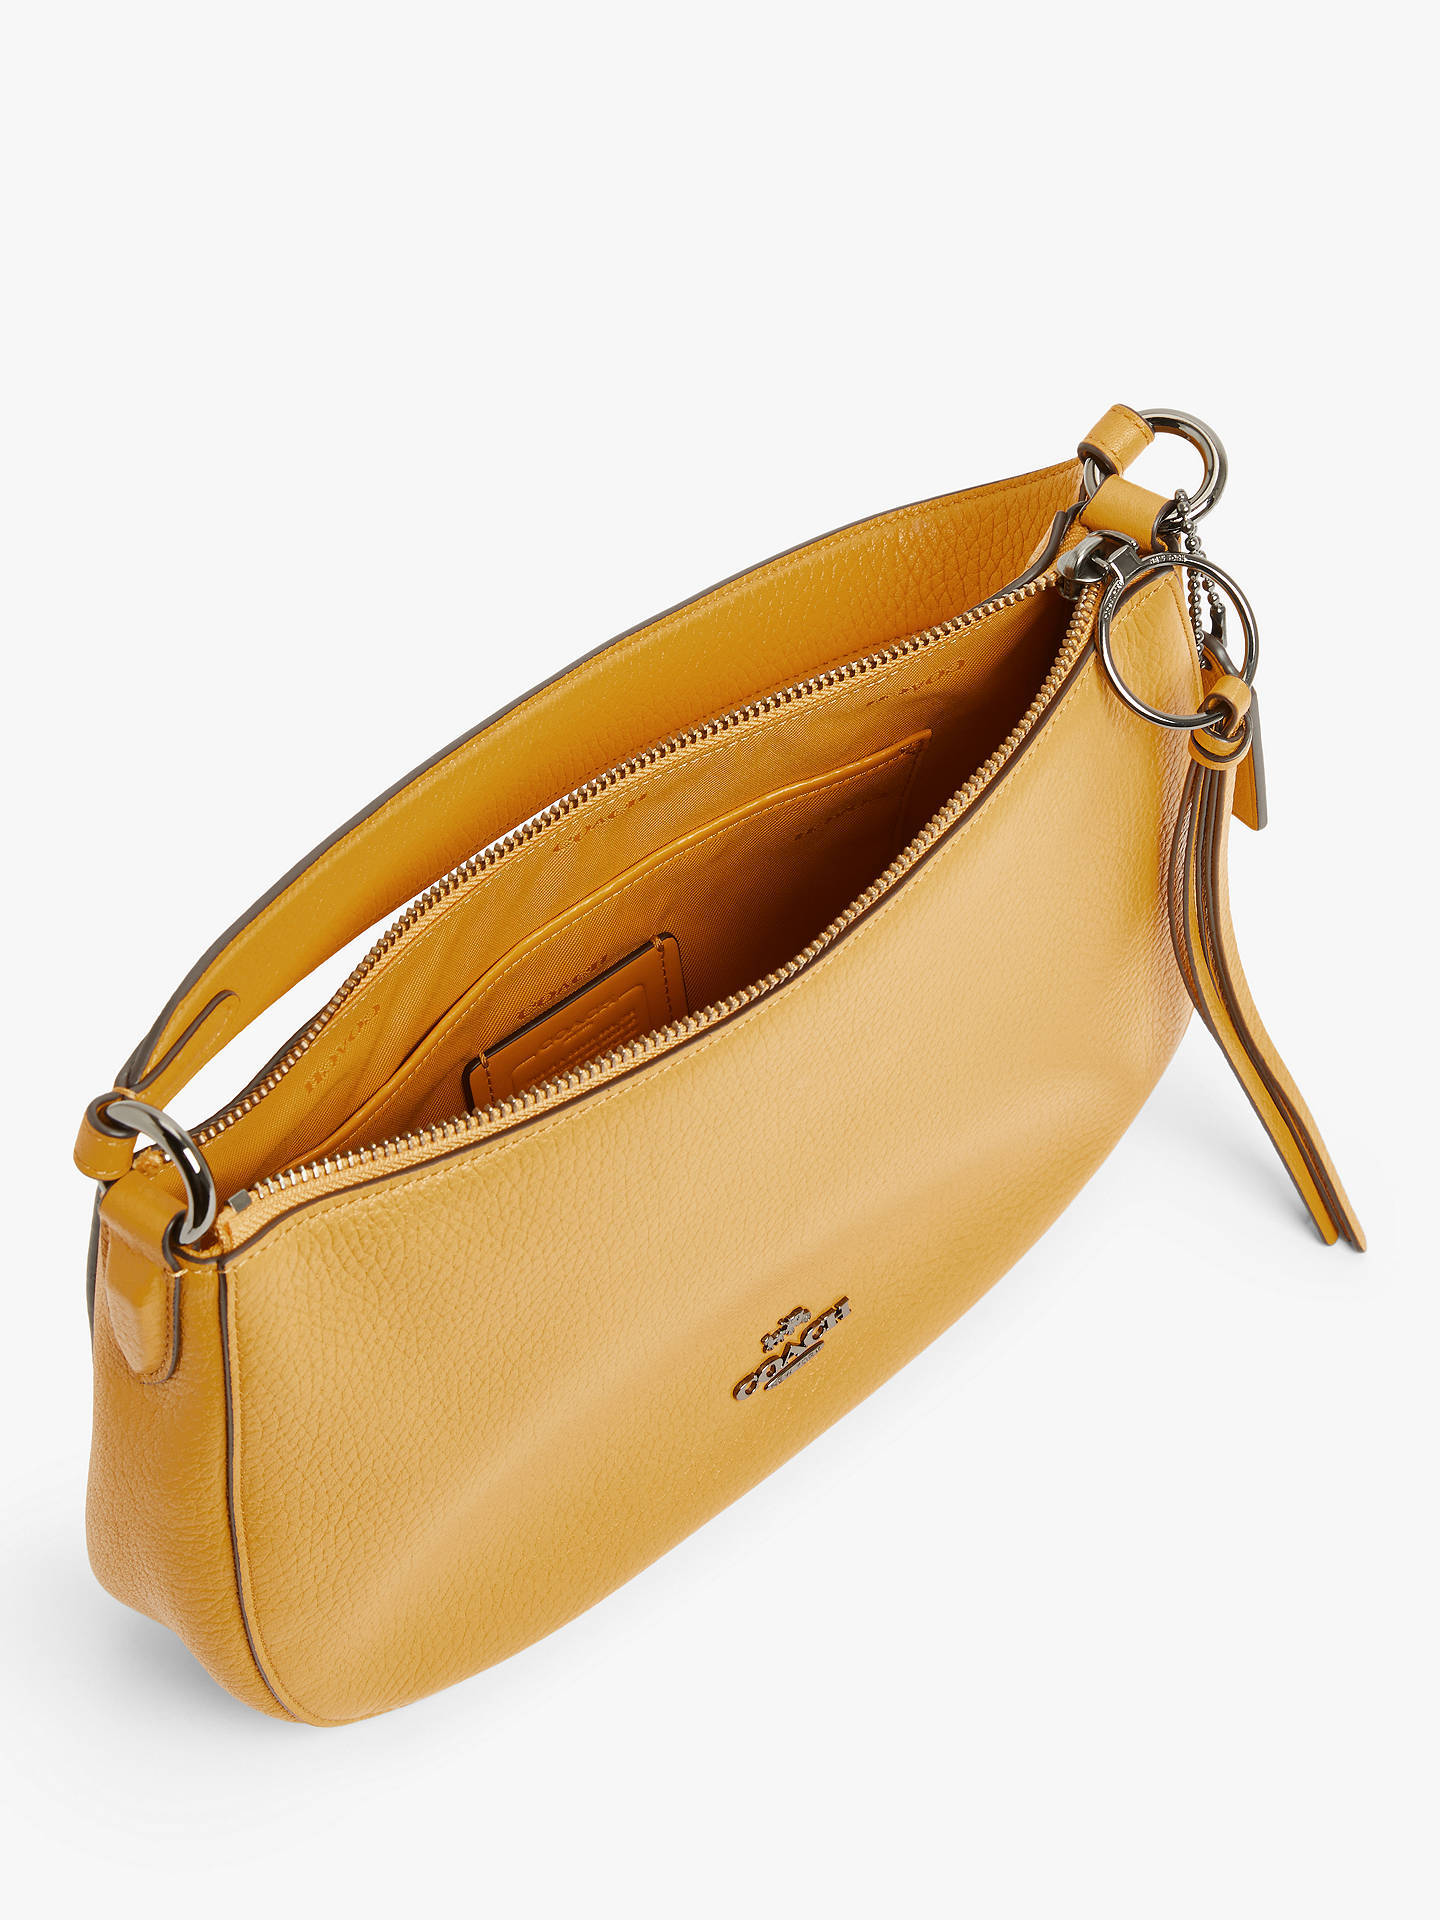 Coach Sutton Leather Cross Body Bag at John Lewis & Partners